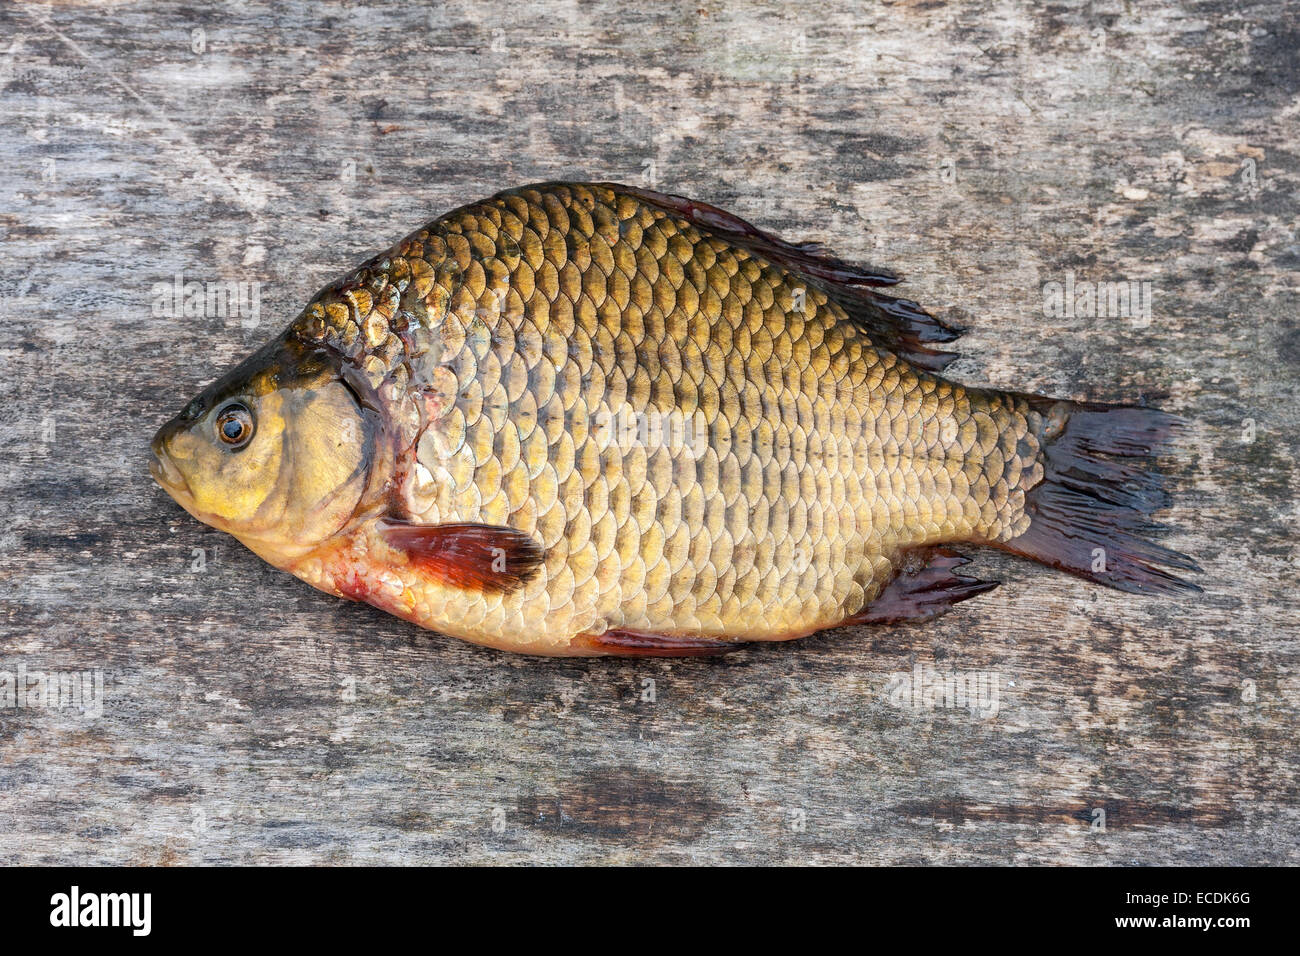 Live freshwater fish carp on a wooden board Stock Photo - Alamy